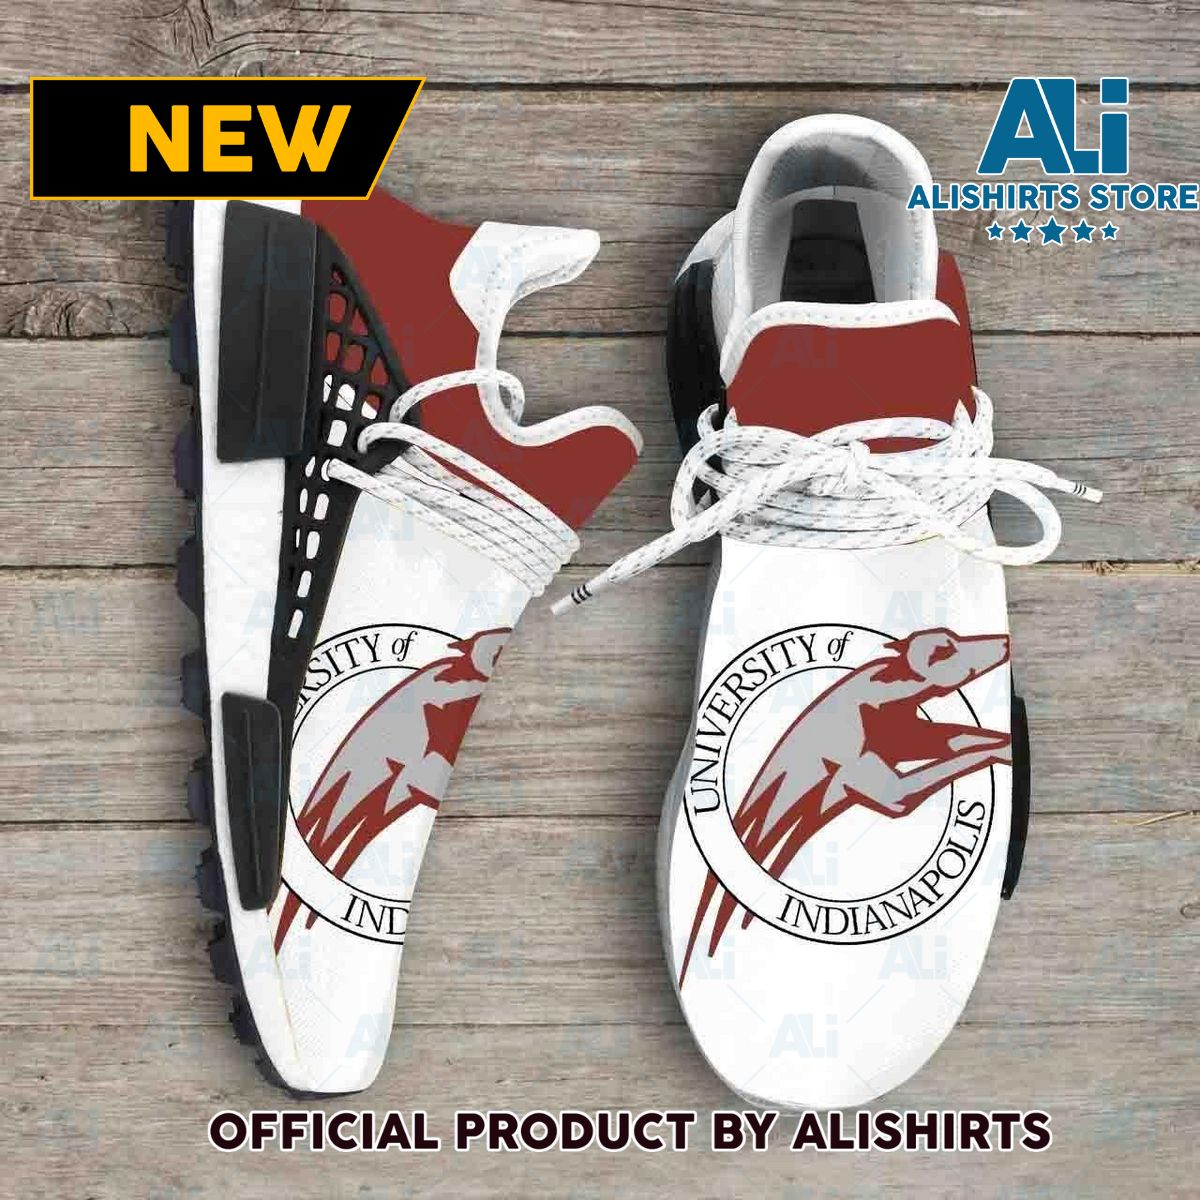 Indianapolis Greyhounds Ncaa NMD Human Race shoes Adidas NMD Sneakers